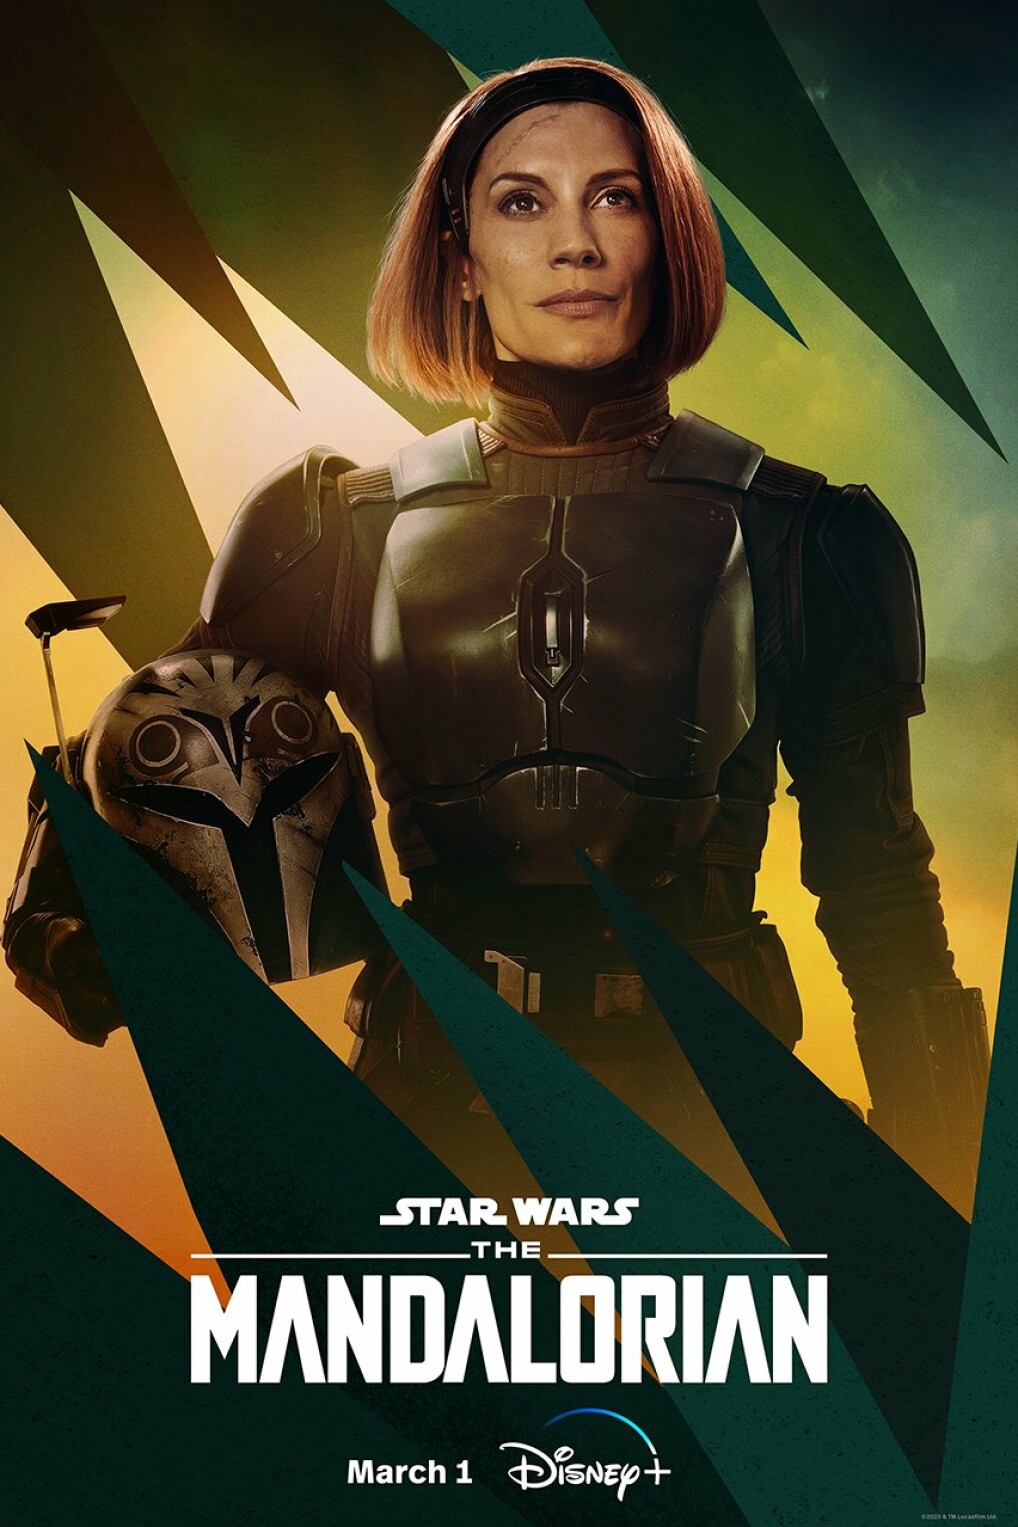 The Mandalorian Season 3: New Character Posters for the Disney+ Series - Image 3 of 3